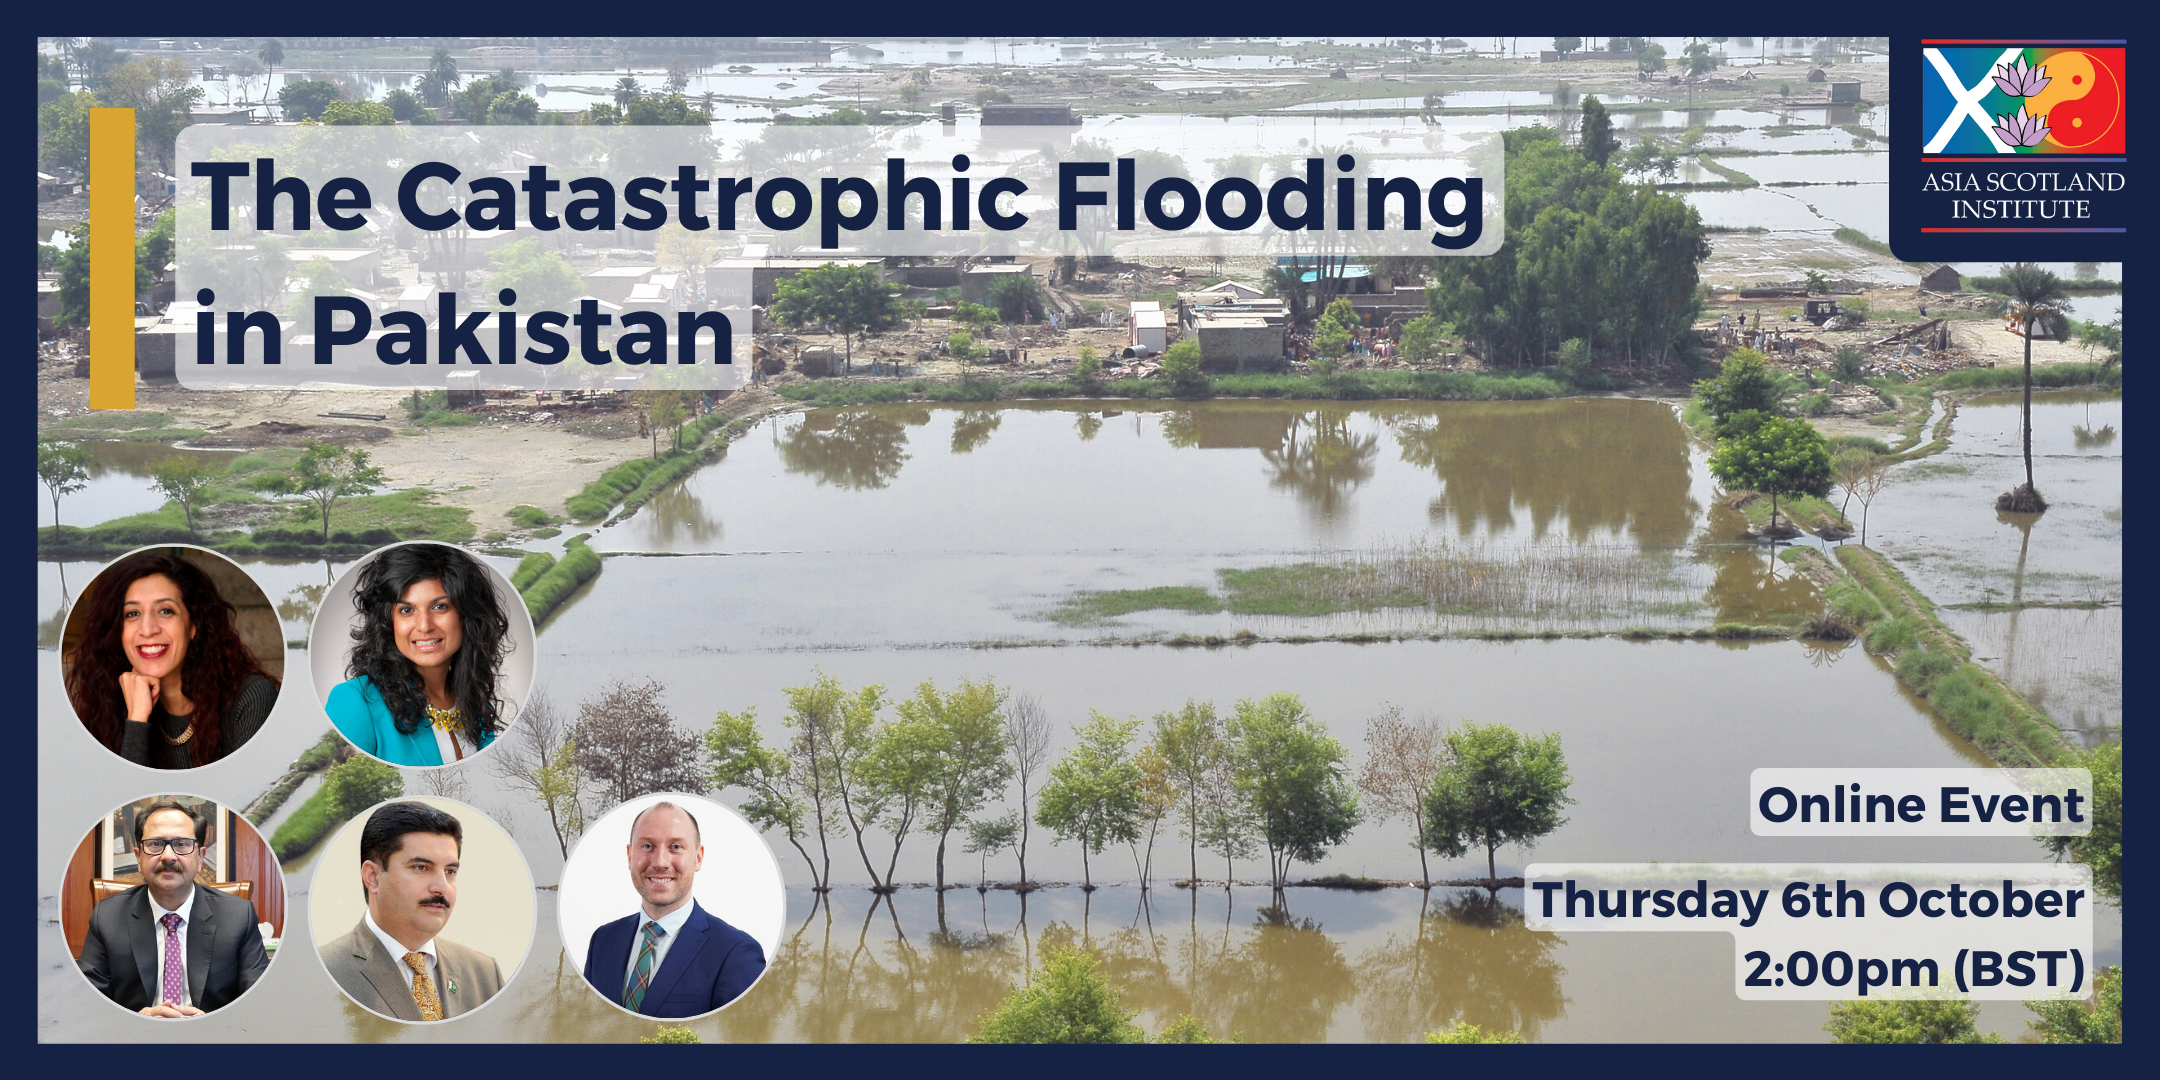 The Catastrophic Flooding in Pakistan